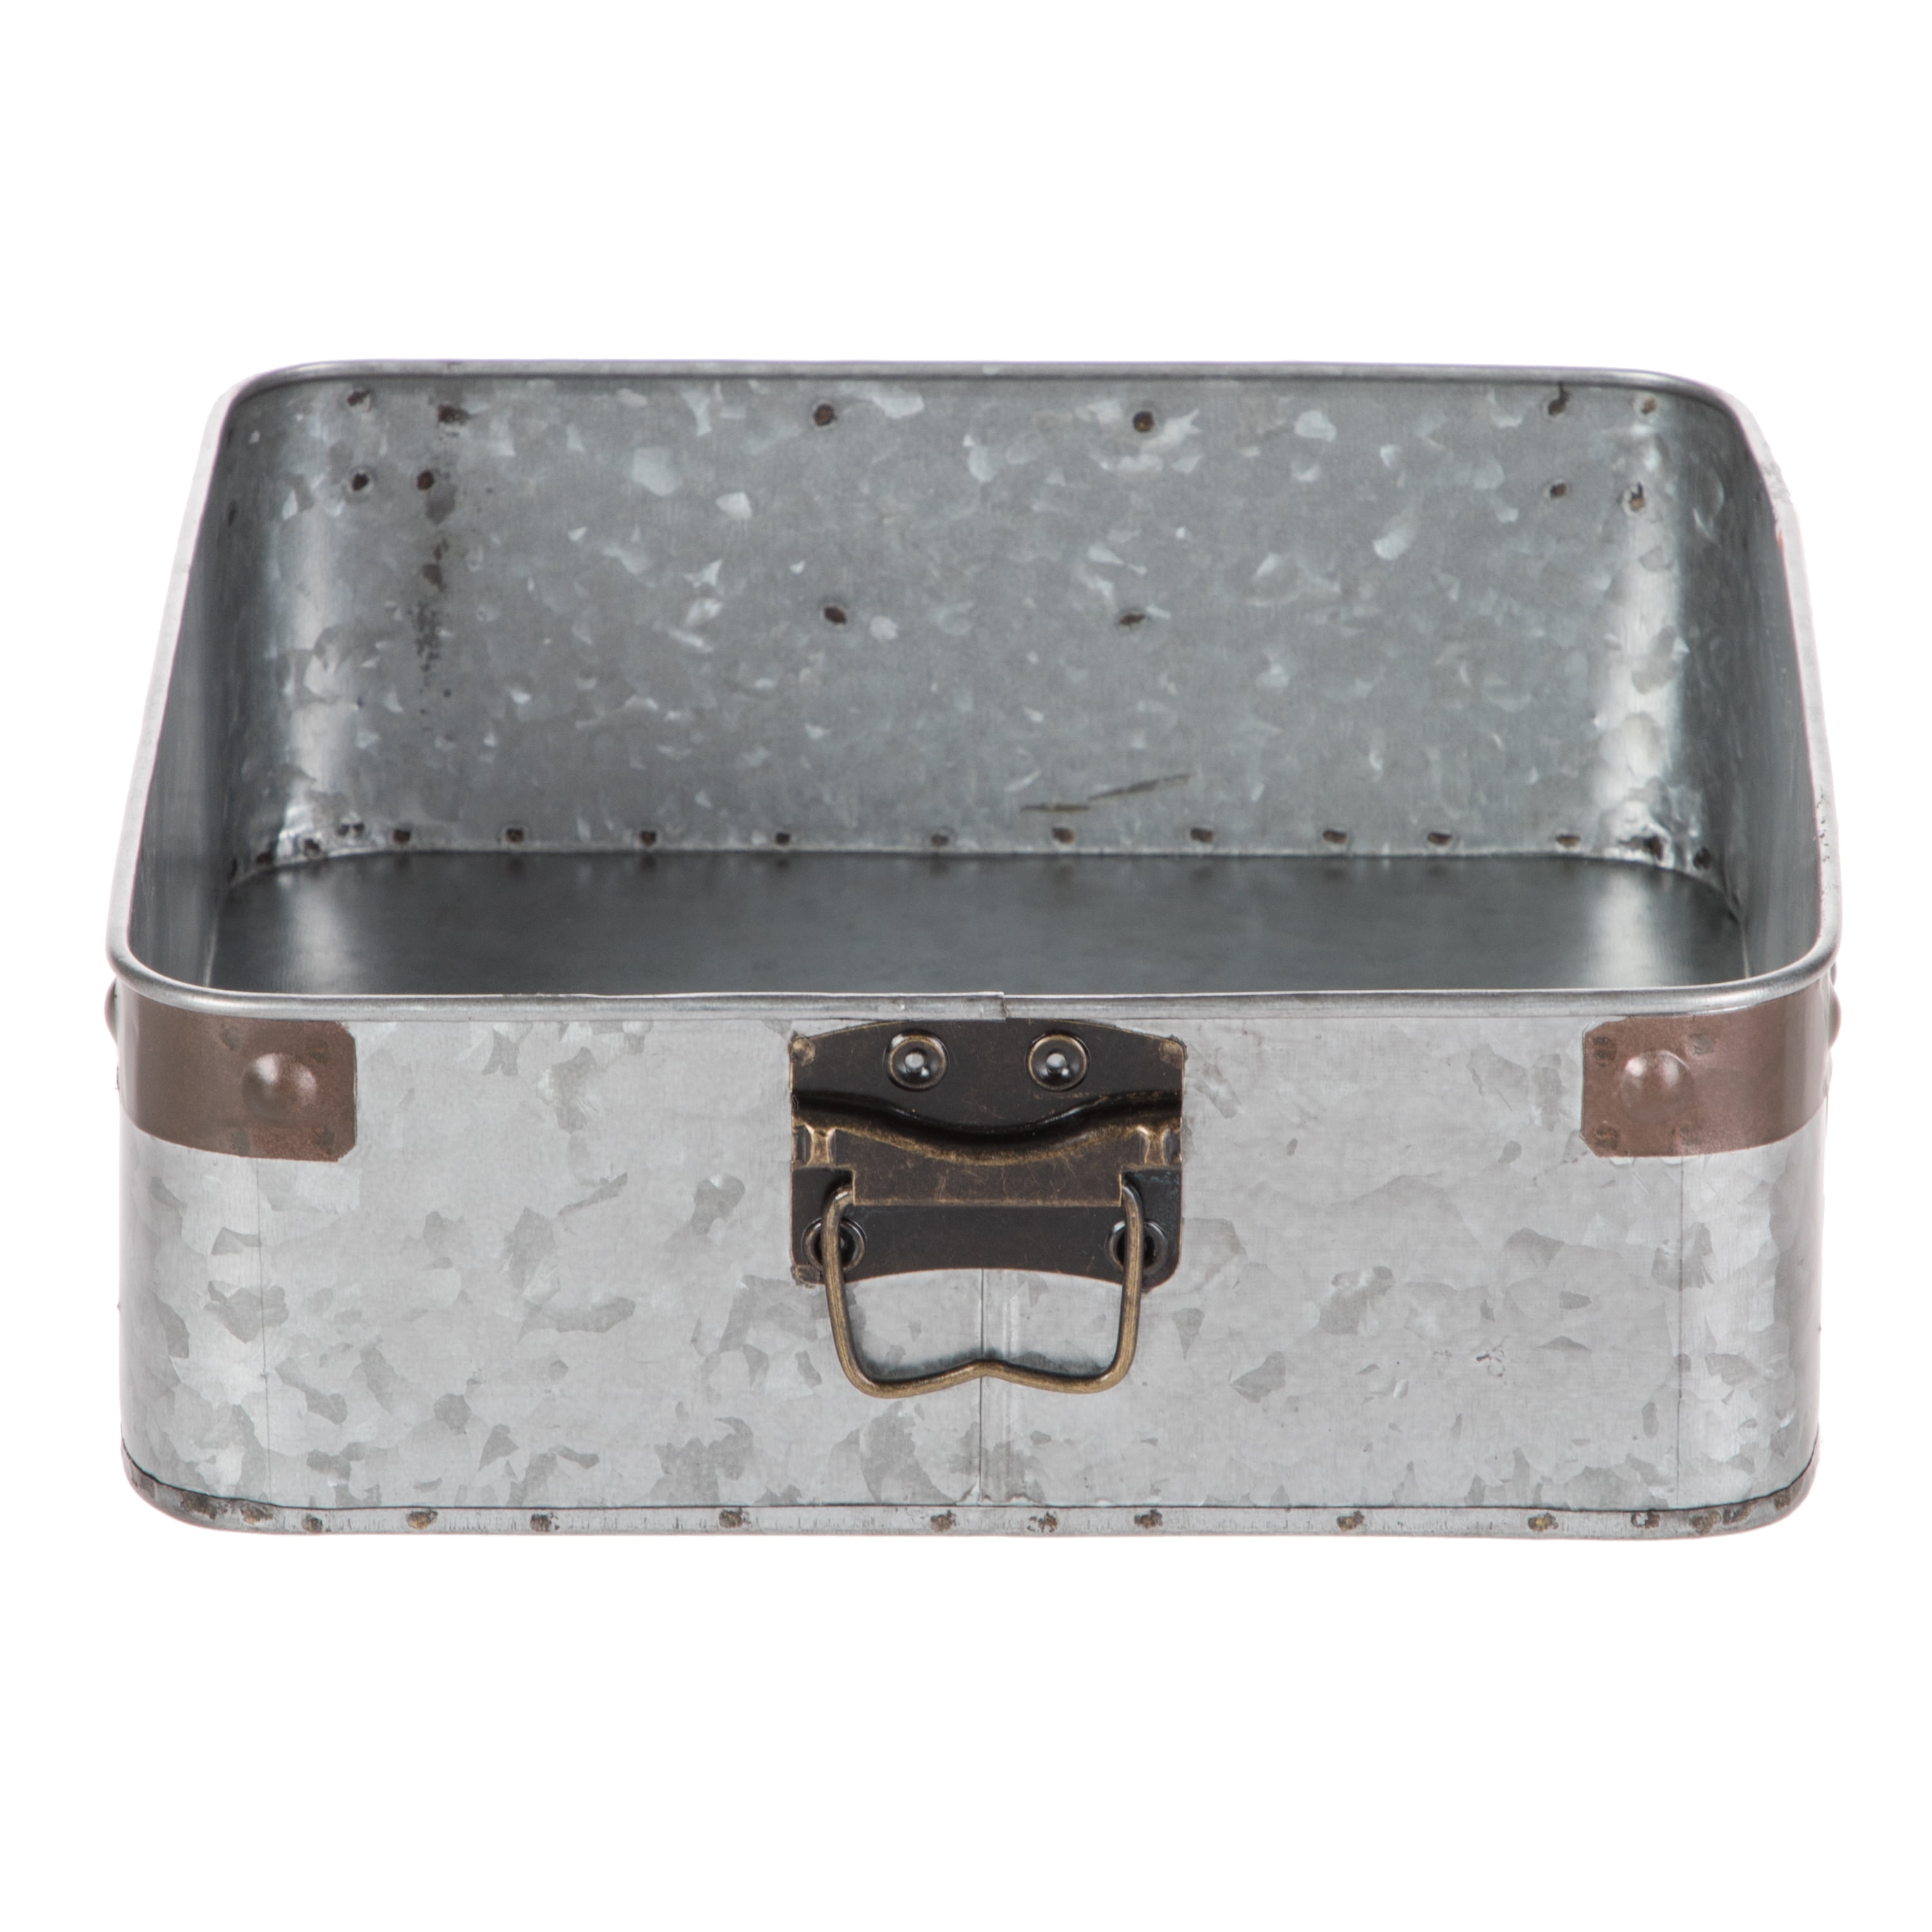 Mainstays Silver Galvanized Metal Square Tray with Bronze Antique Accents